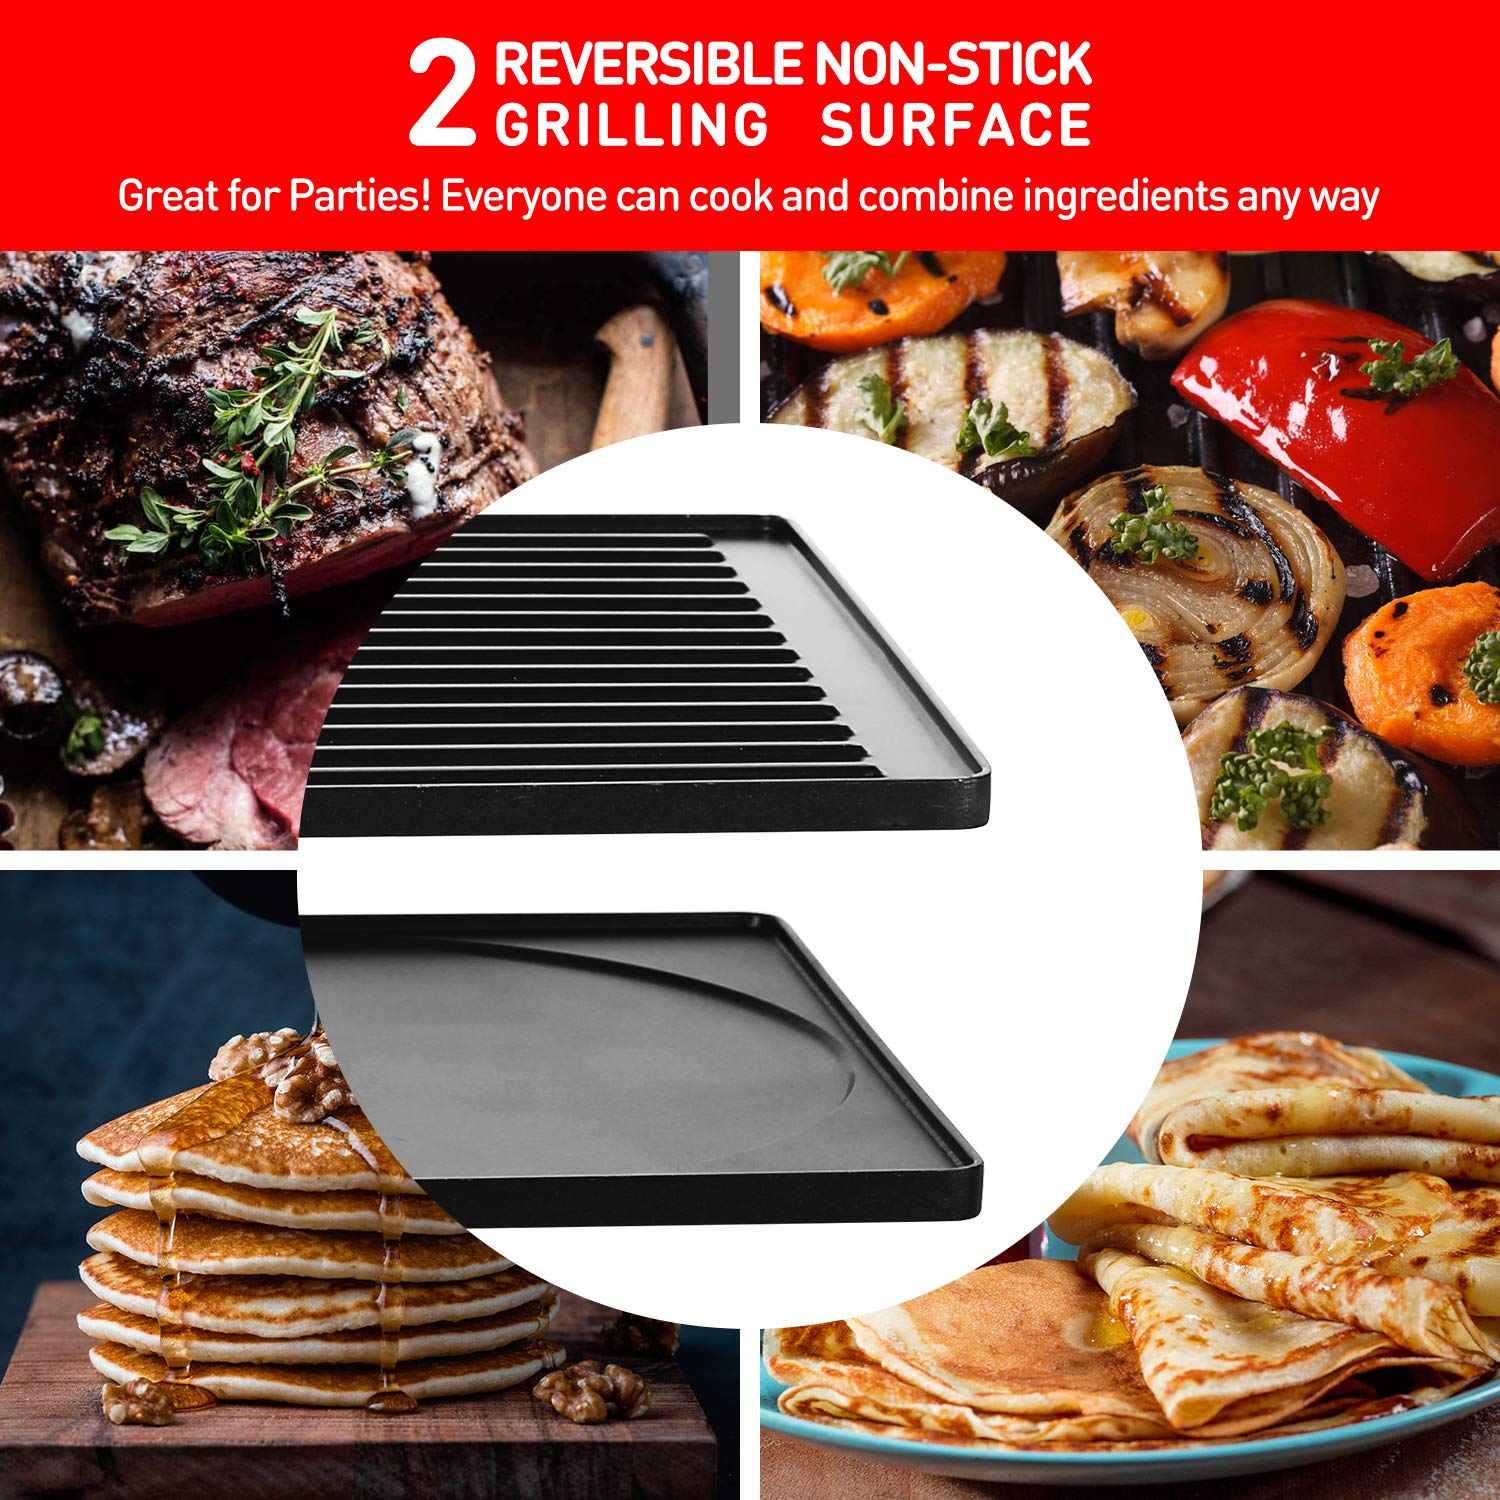 Indoor Grill, Techwood 1500W Smokeless Electric Grill with Non-Stick Grill  Plates, Korean Grill with Temperature Control, Tempered Glass Lid,  Dishwasher-Safe 